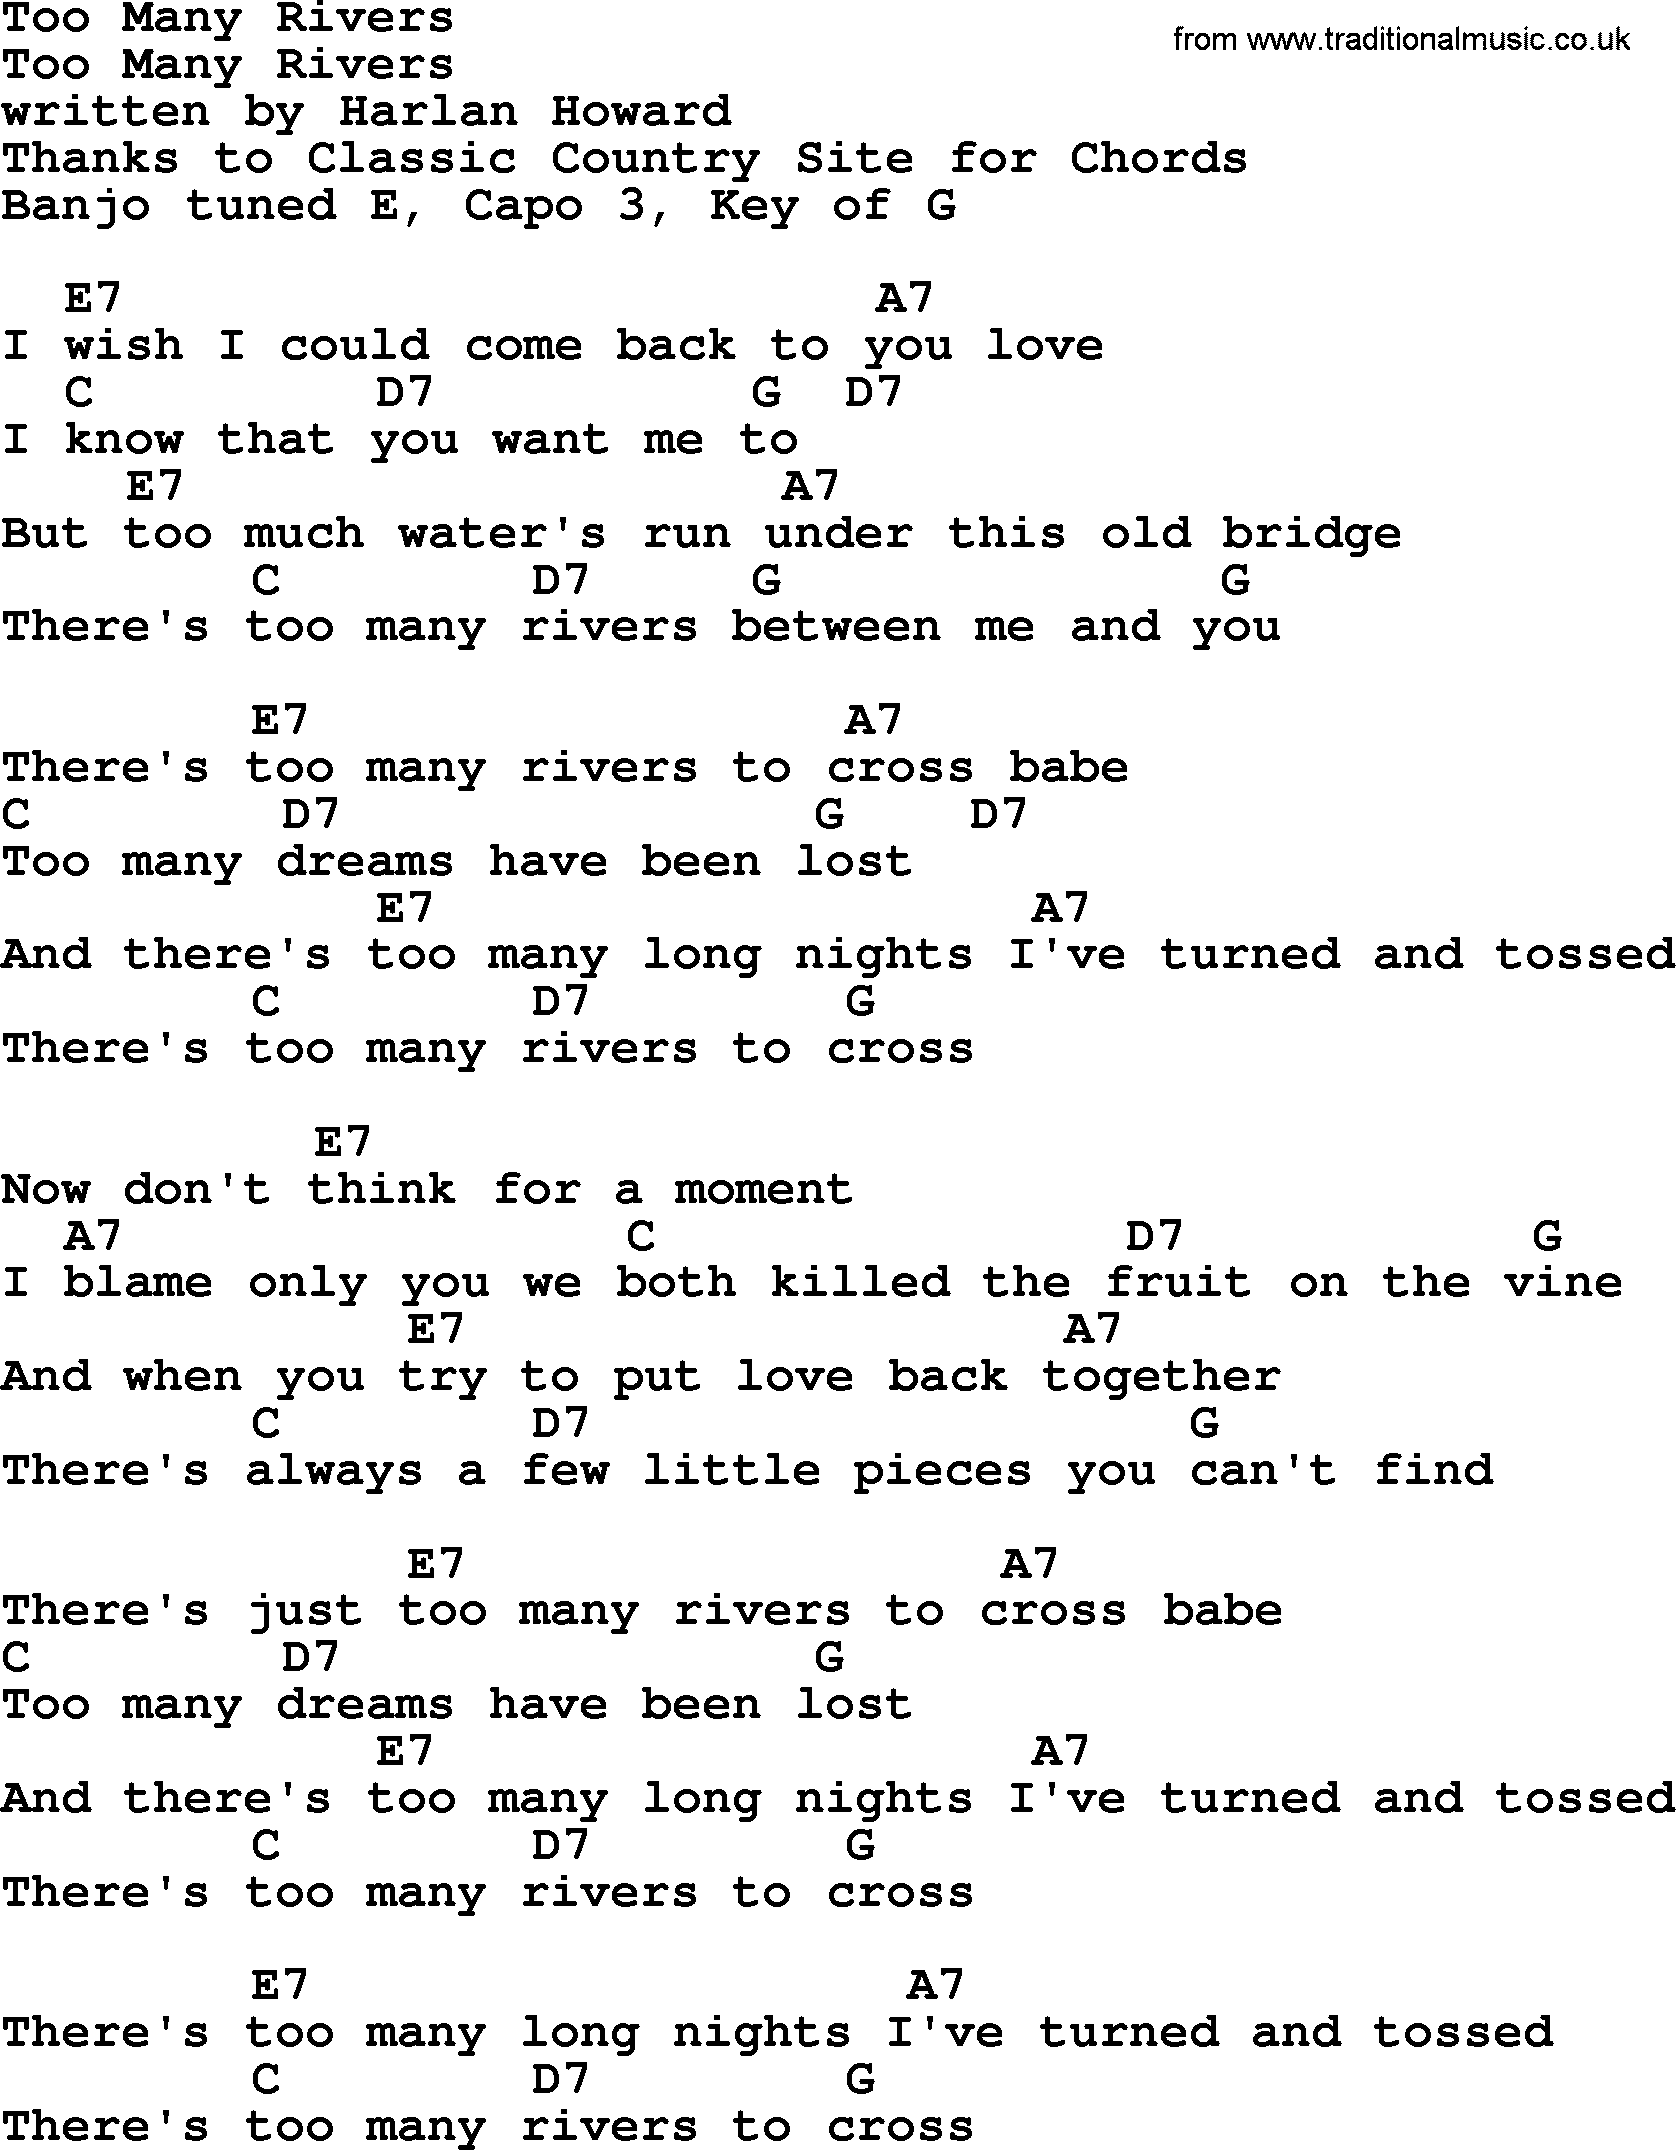 Bluegrass song: Too Many Rivers, lyrics and chords